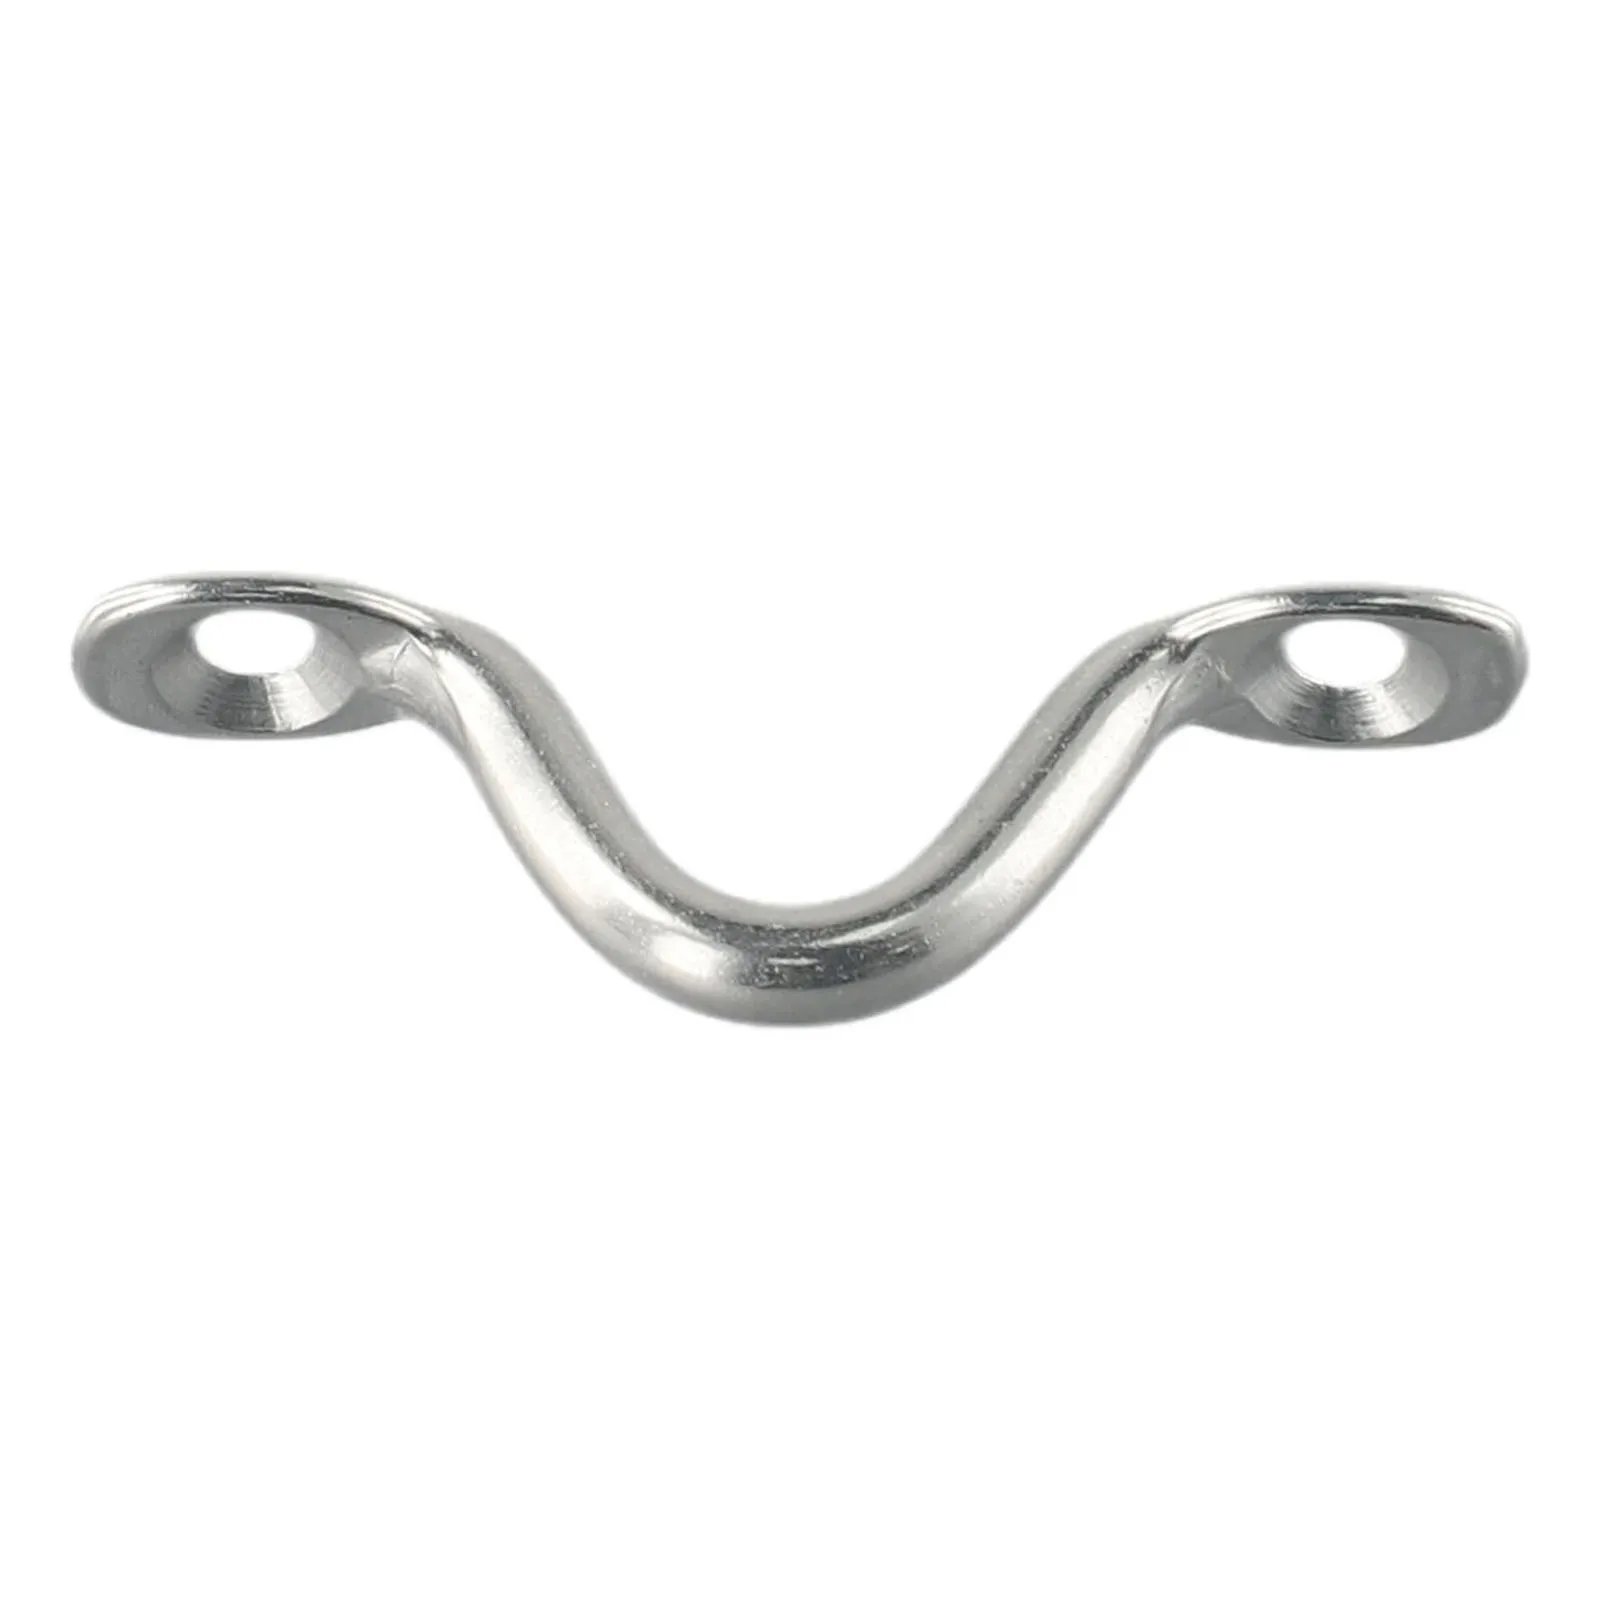 

4Pcs Stainless Steel Wire Strap Boat Marine Tie Down Hook Canopy 50mmx17mm 40mm Boats Accessories